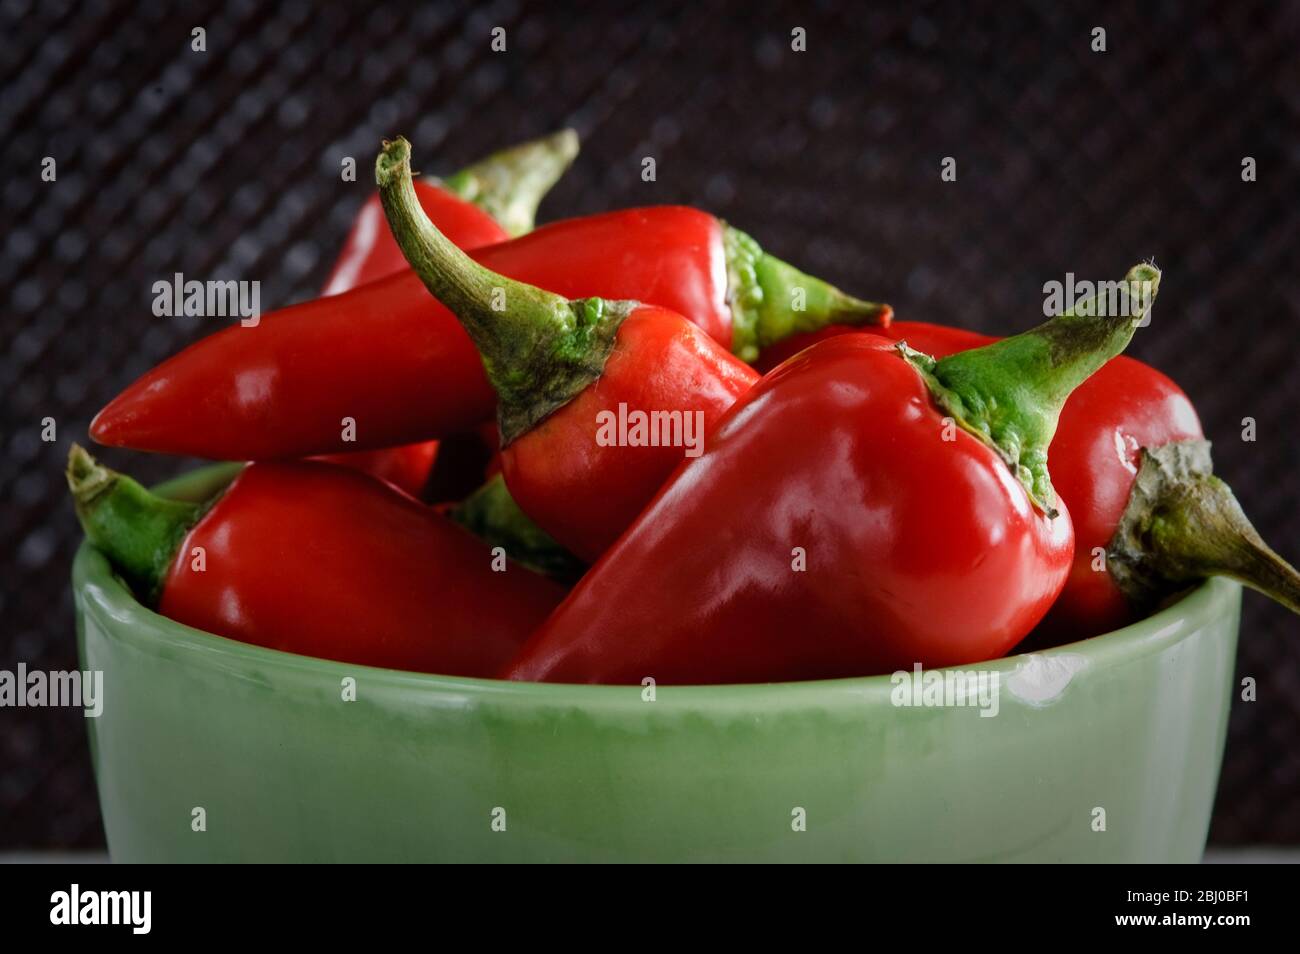 Shiny red chilli peppers in green bowl - Stock Photo